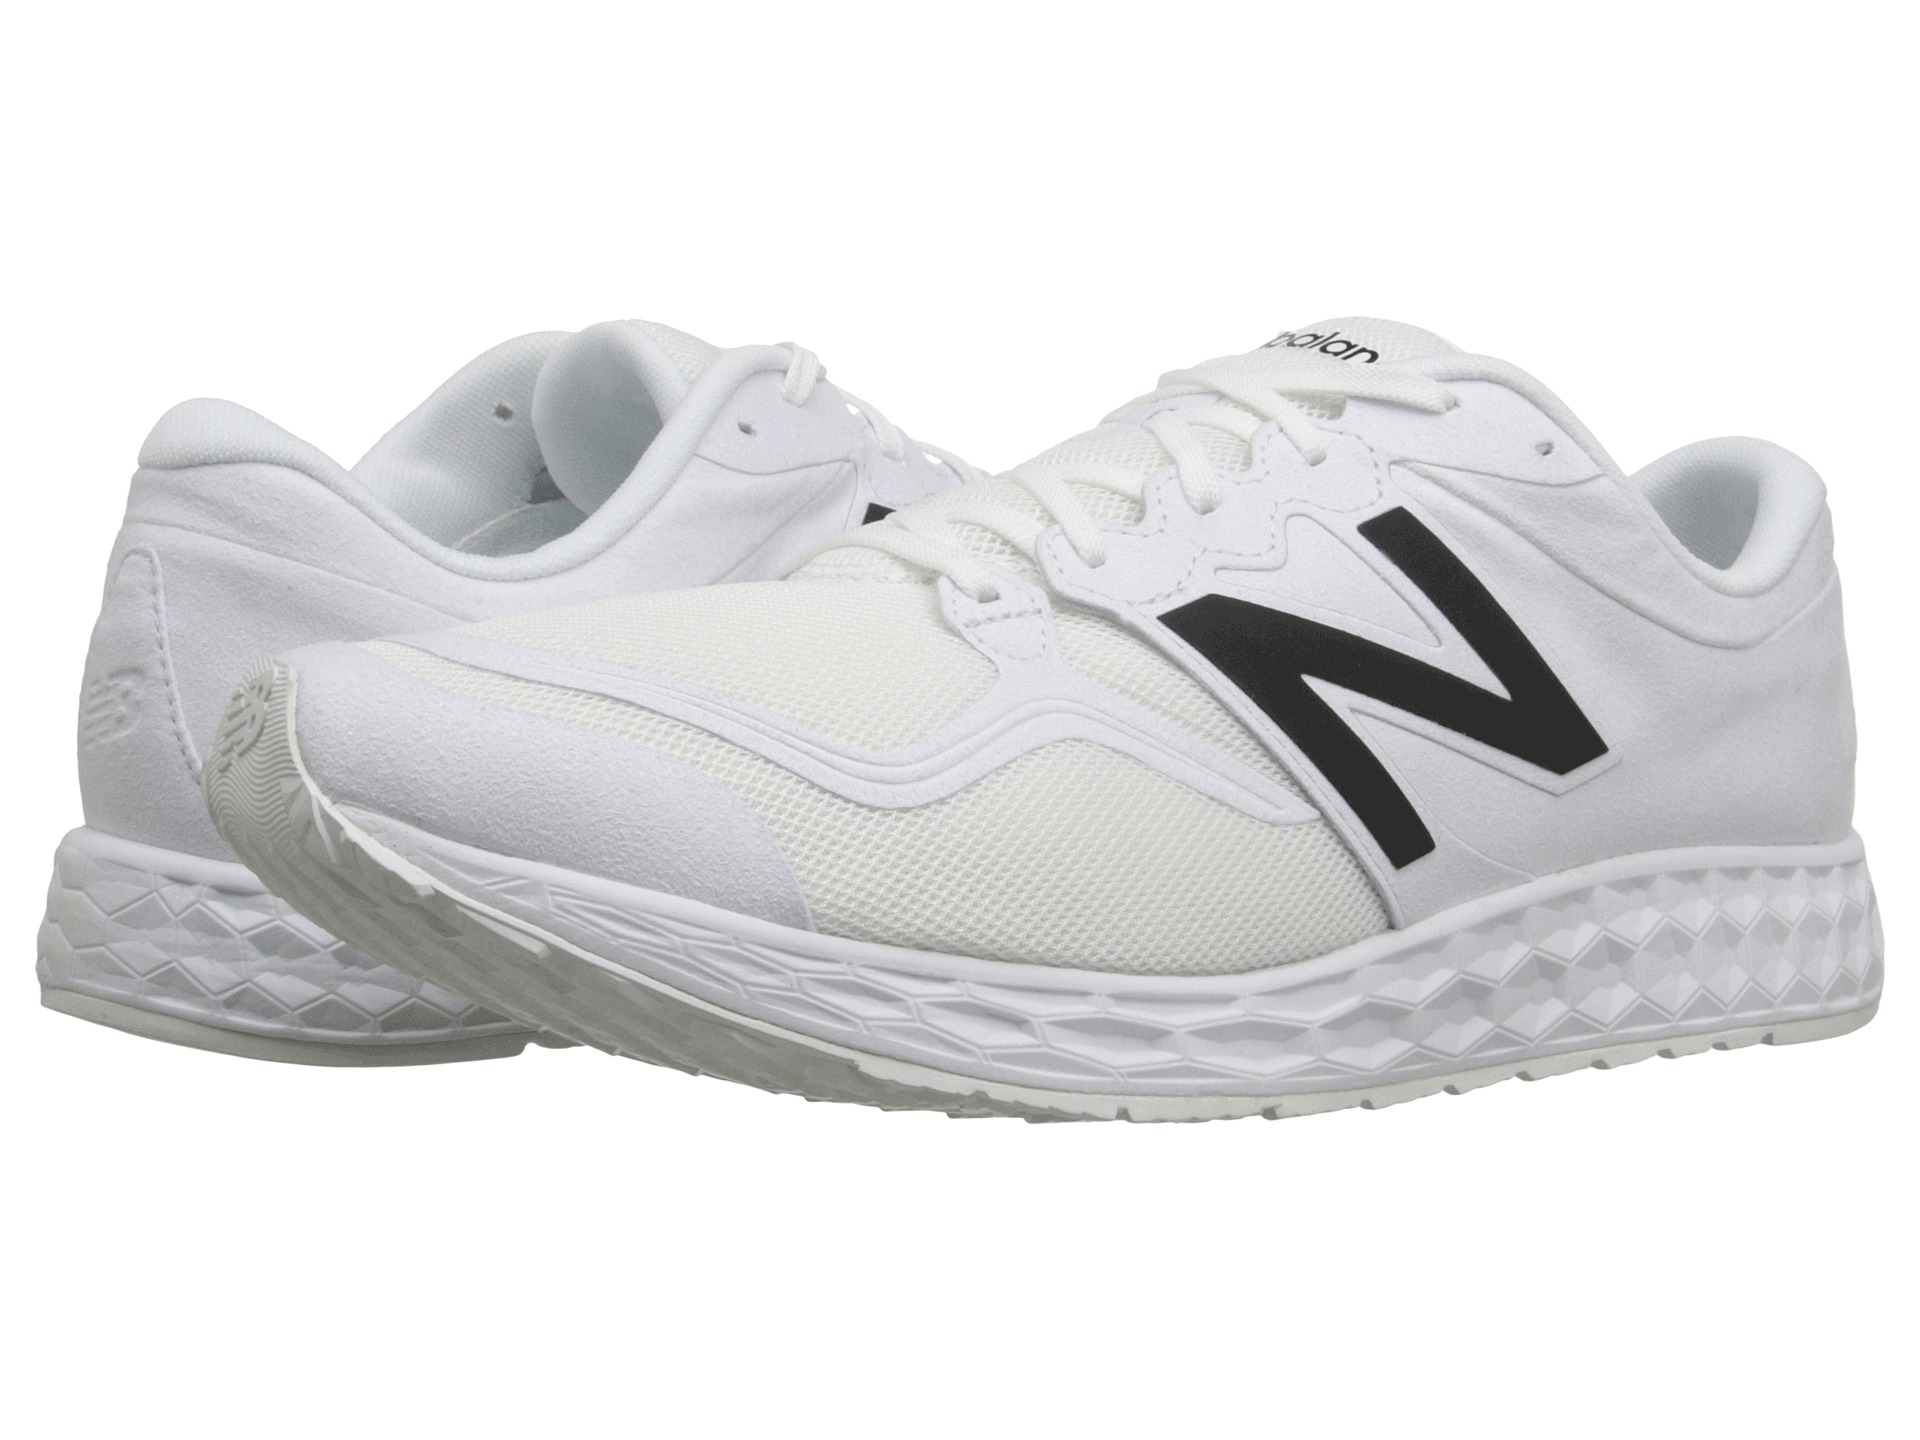 New Balance Leather Ml1980 in White for Men - Lyst